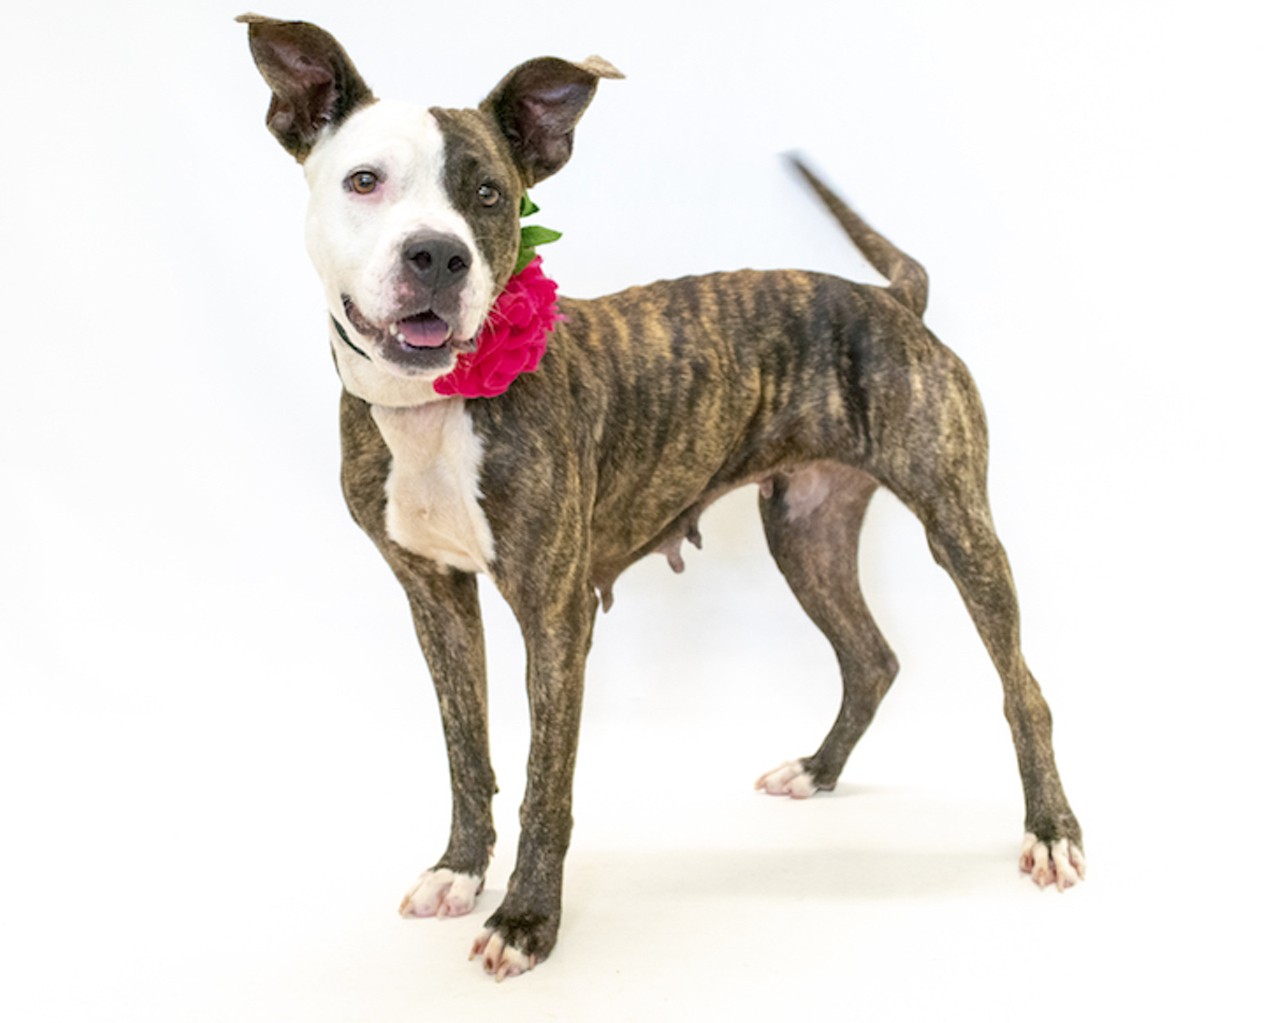 25 adoptable pups available right now at Orange County Animal Services